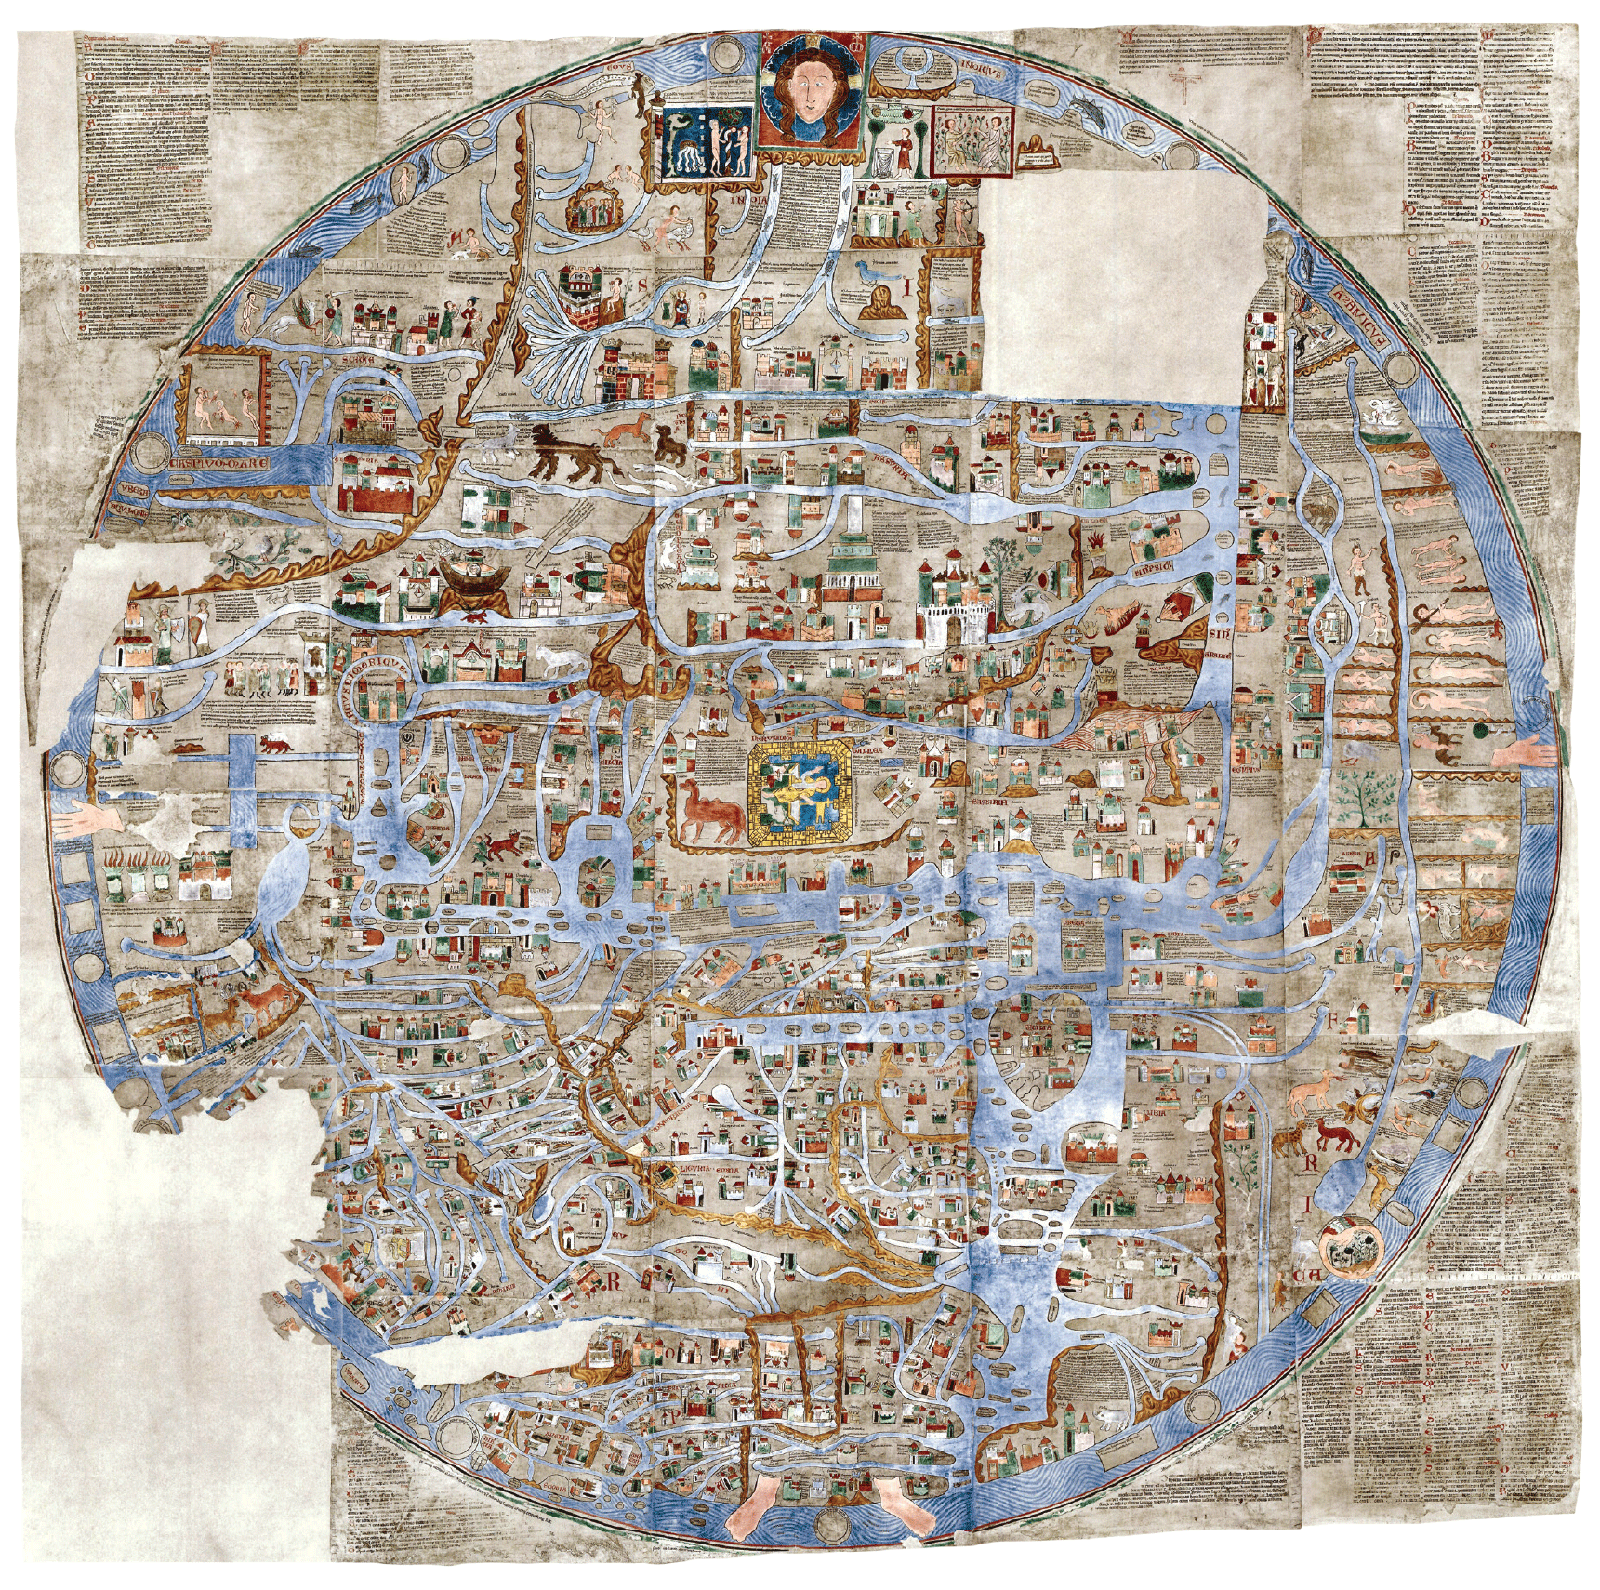 A facsimile of the thirteenth-century Ebstorf Map, the vellum original of which was destroyed in October nineteen forty three during the Allied bombings of Hanover. At nearly twelve feet by twelve feet, it is one of the largest of the known medieval mappae mundi. The radial map was discovered in circa eighteen thirty in what is now Lower Saxony, and depicts the world incorporated within the body of the crucified Christ, whose head, hands, and feet are situated at the four major points of the compass rose.